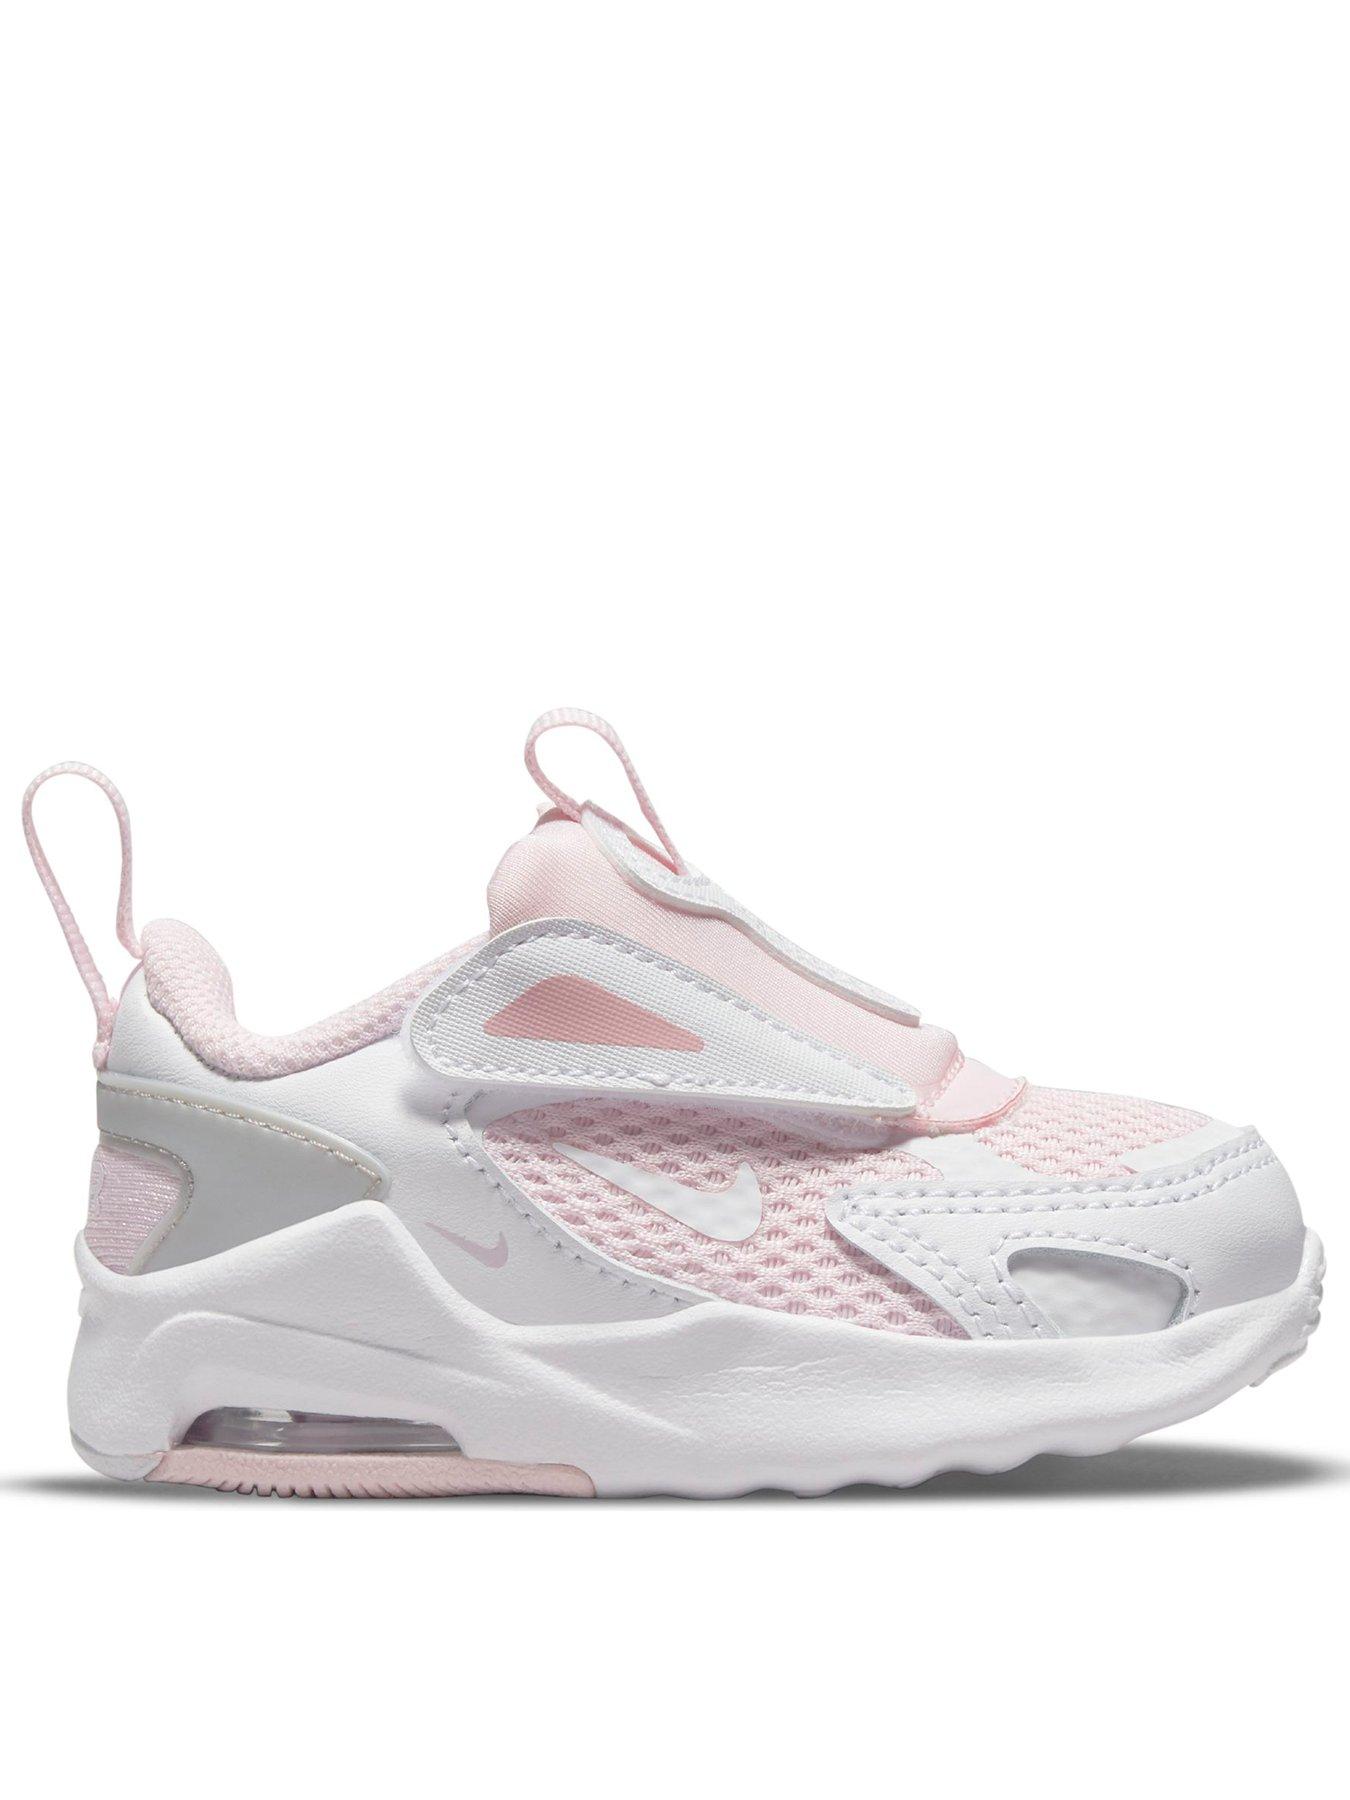 Trainers Air Max Bolt Infant Trainer - Pink/White